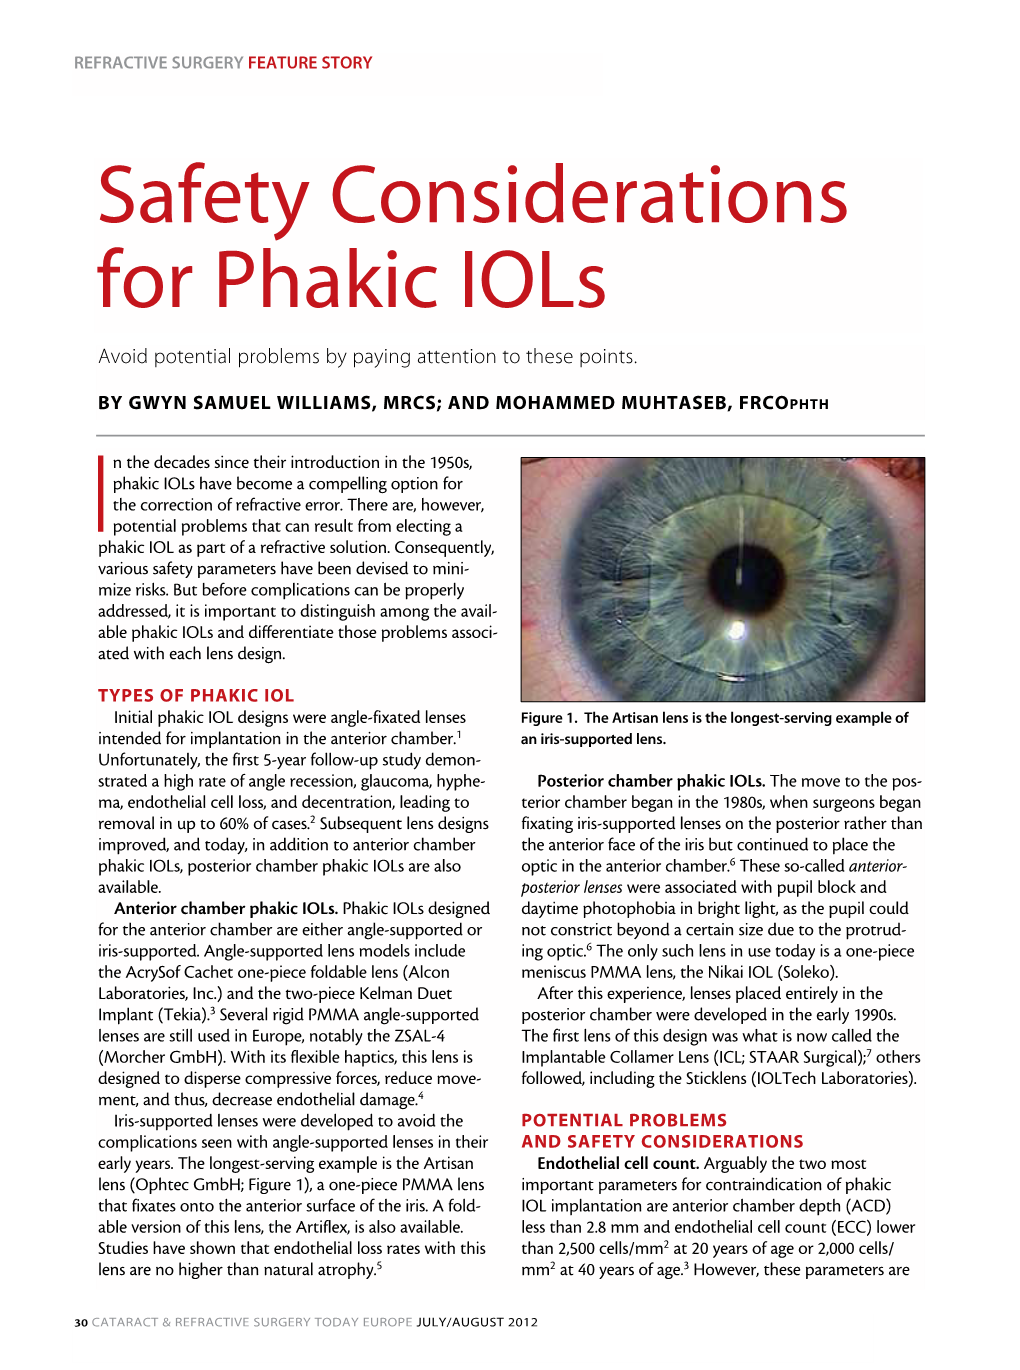 Safety Considerations for Phakic Iols Avoid Potential Problems by Paying Attention to These Points